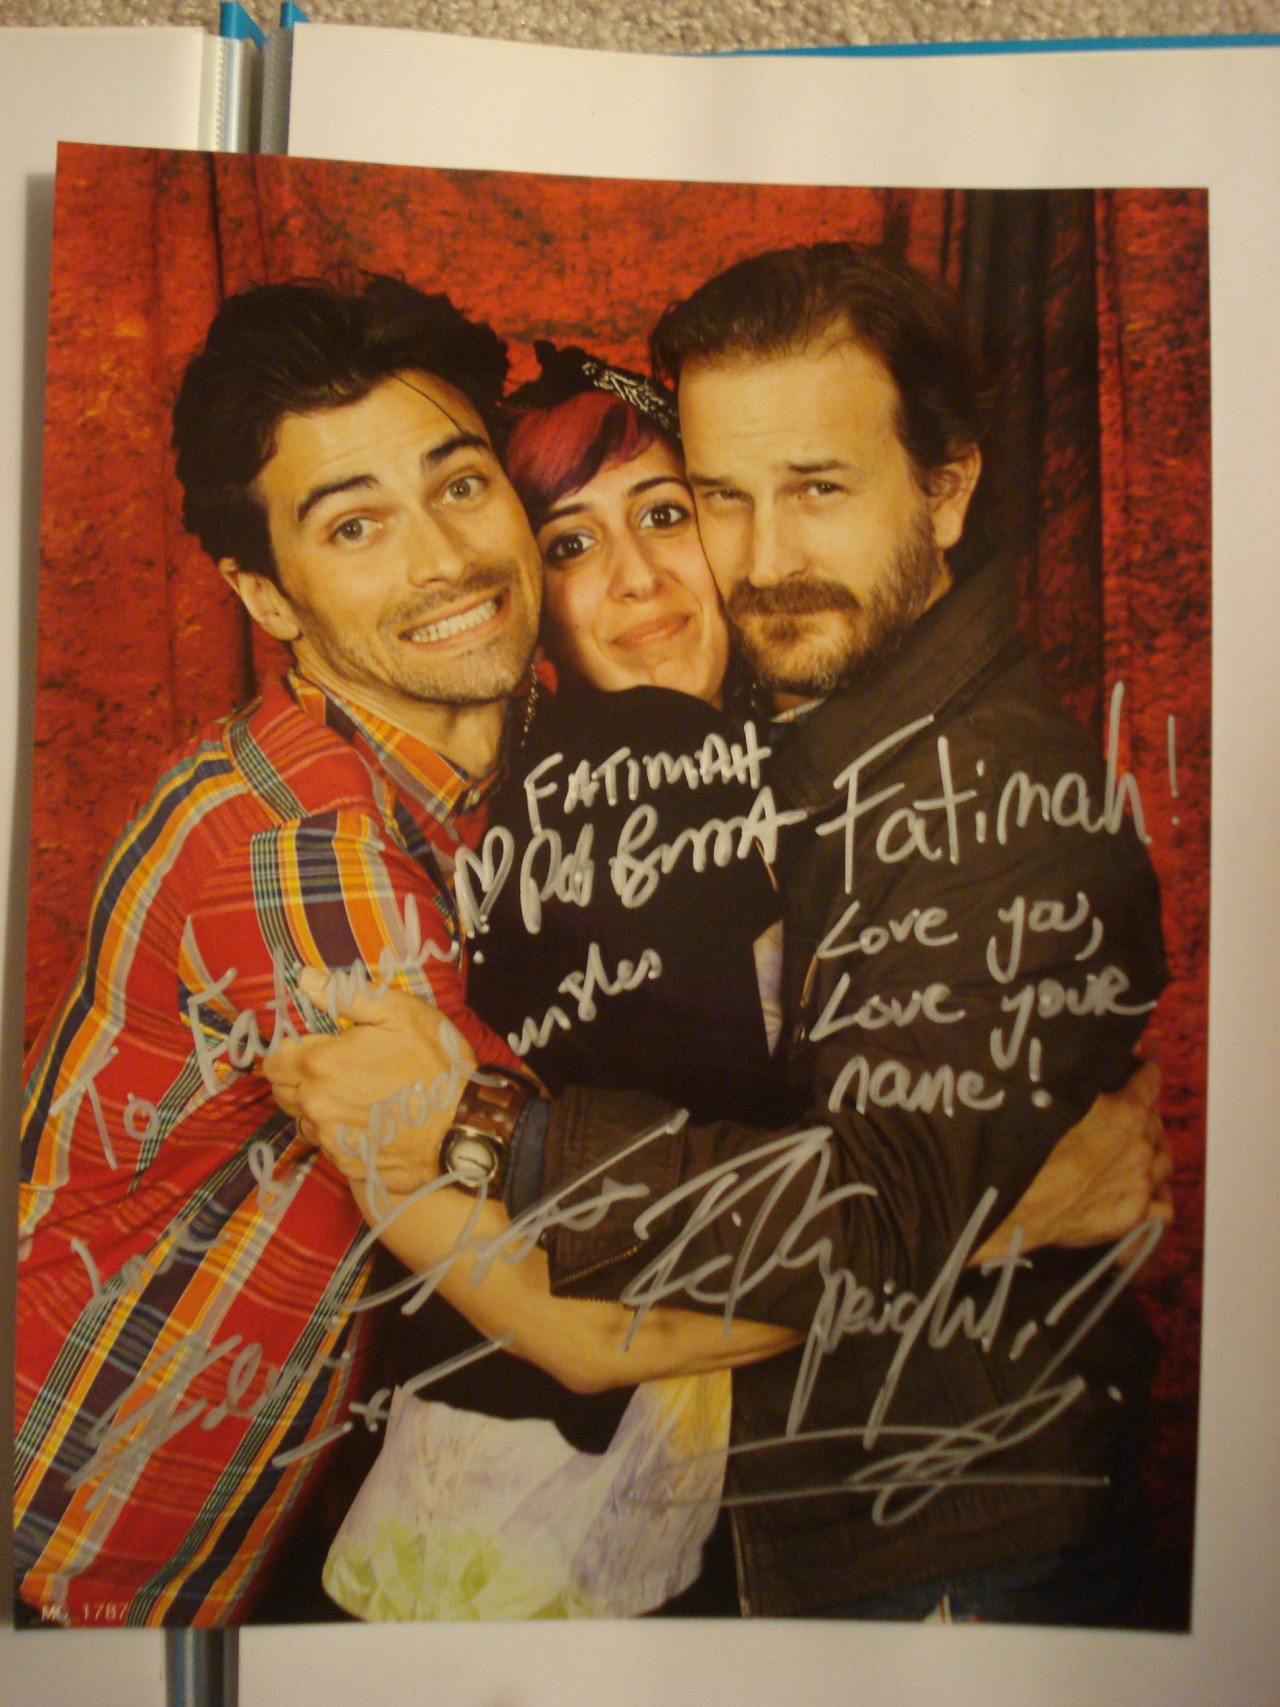 My photo op with Richard and Matt :)  I bought an autograph for Richard and Rob